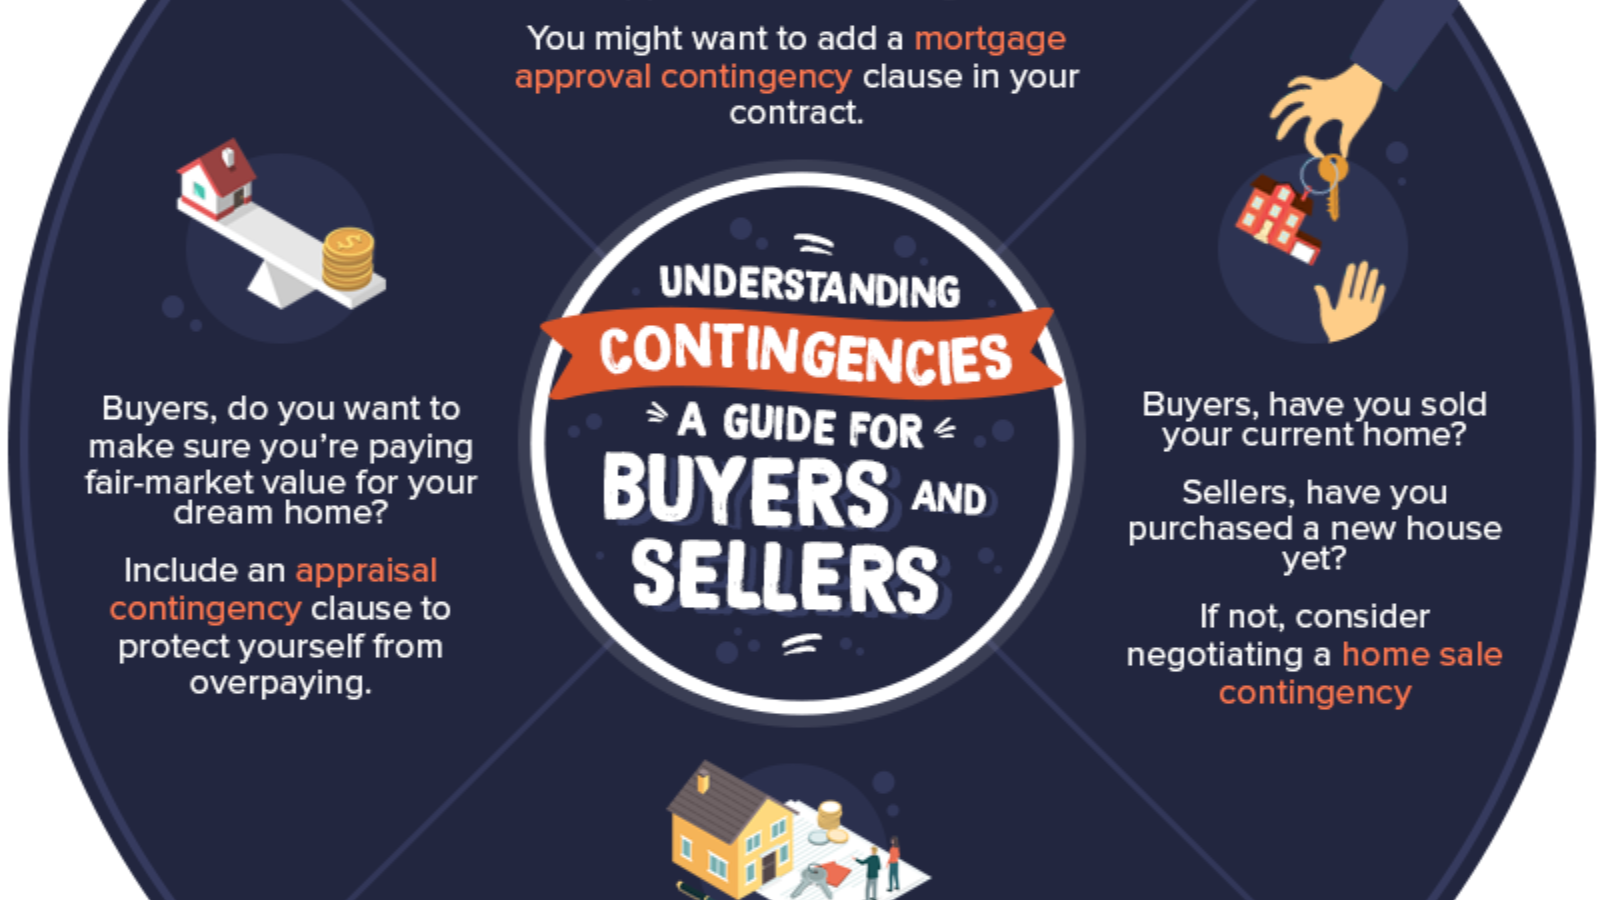 Understanding Contingencies: A Guide For Buyers and Sellers